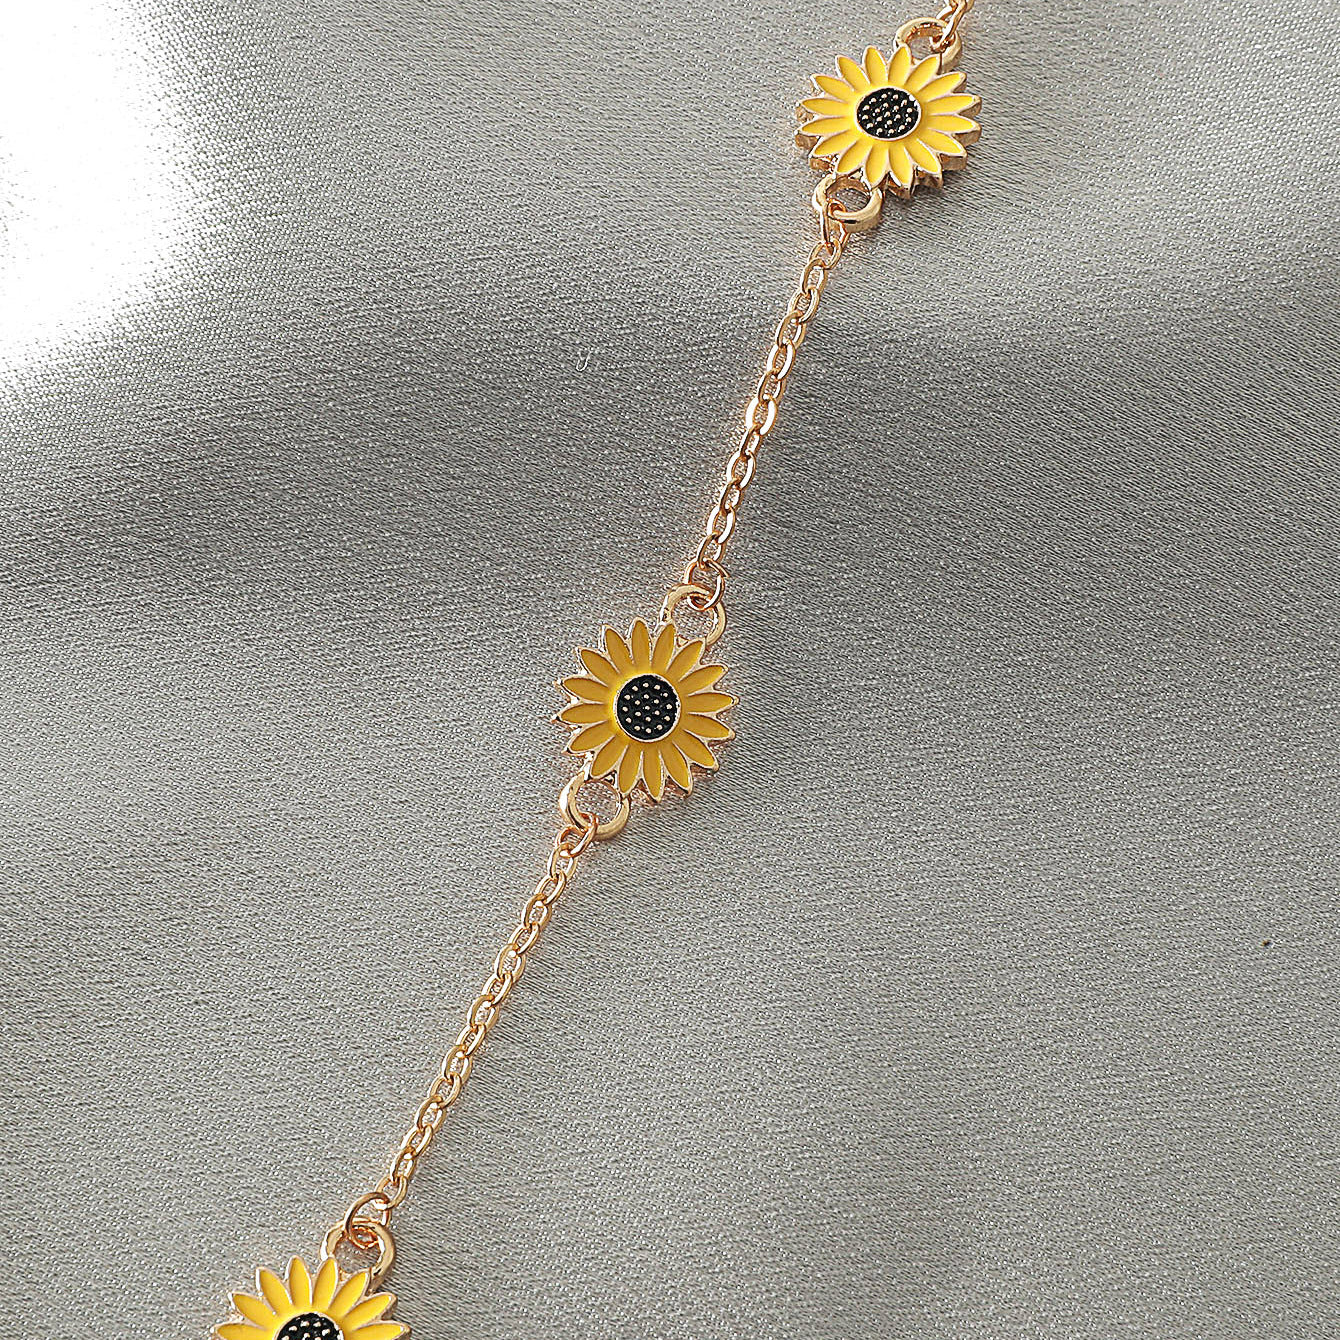 Classic simple sunflower design all-match anklet - Syble's